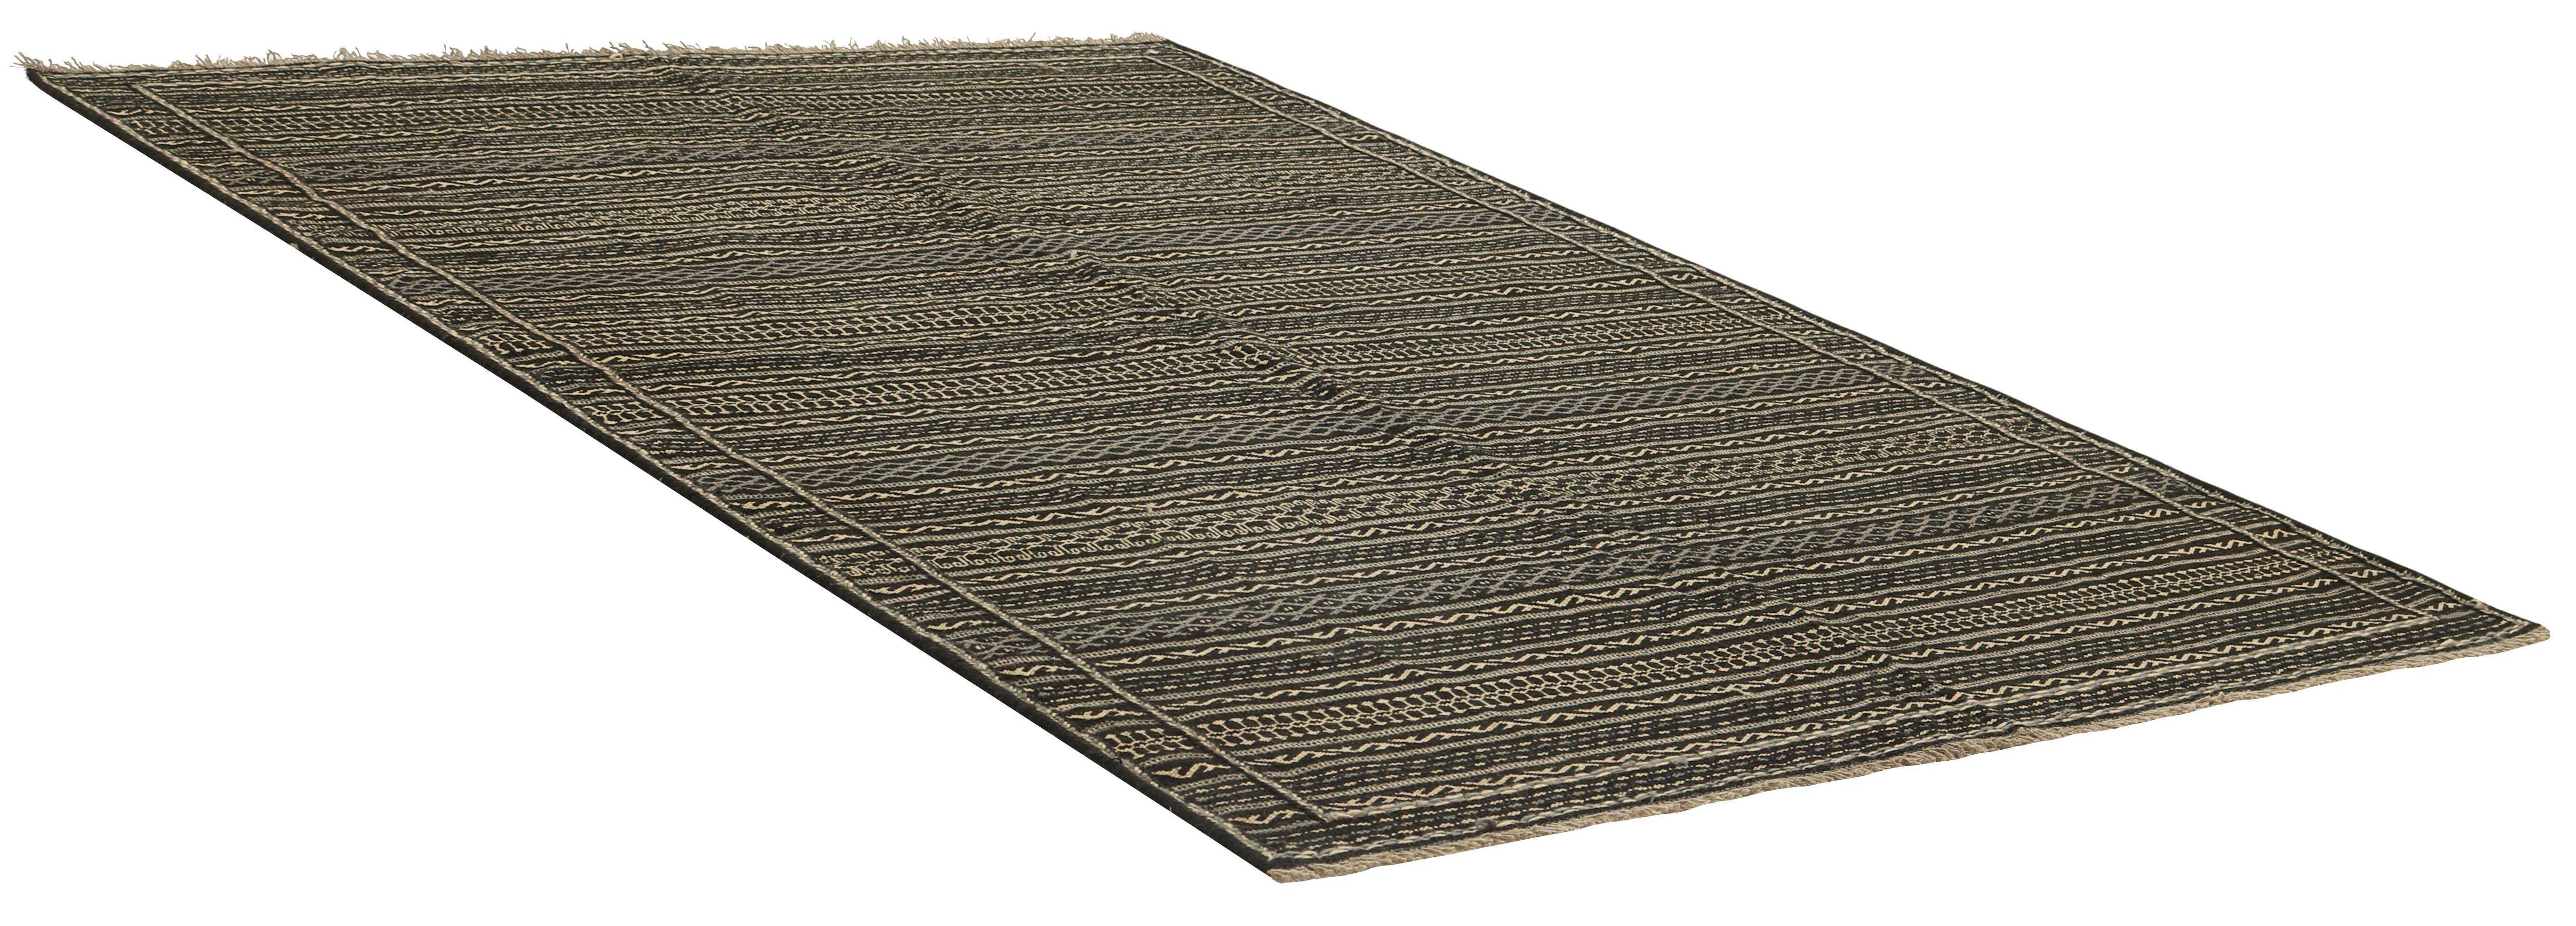 Authentic persian kelim flatweave rug with traditional geometric design in black and beige